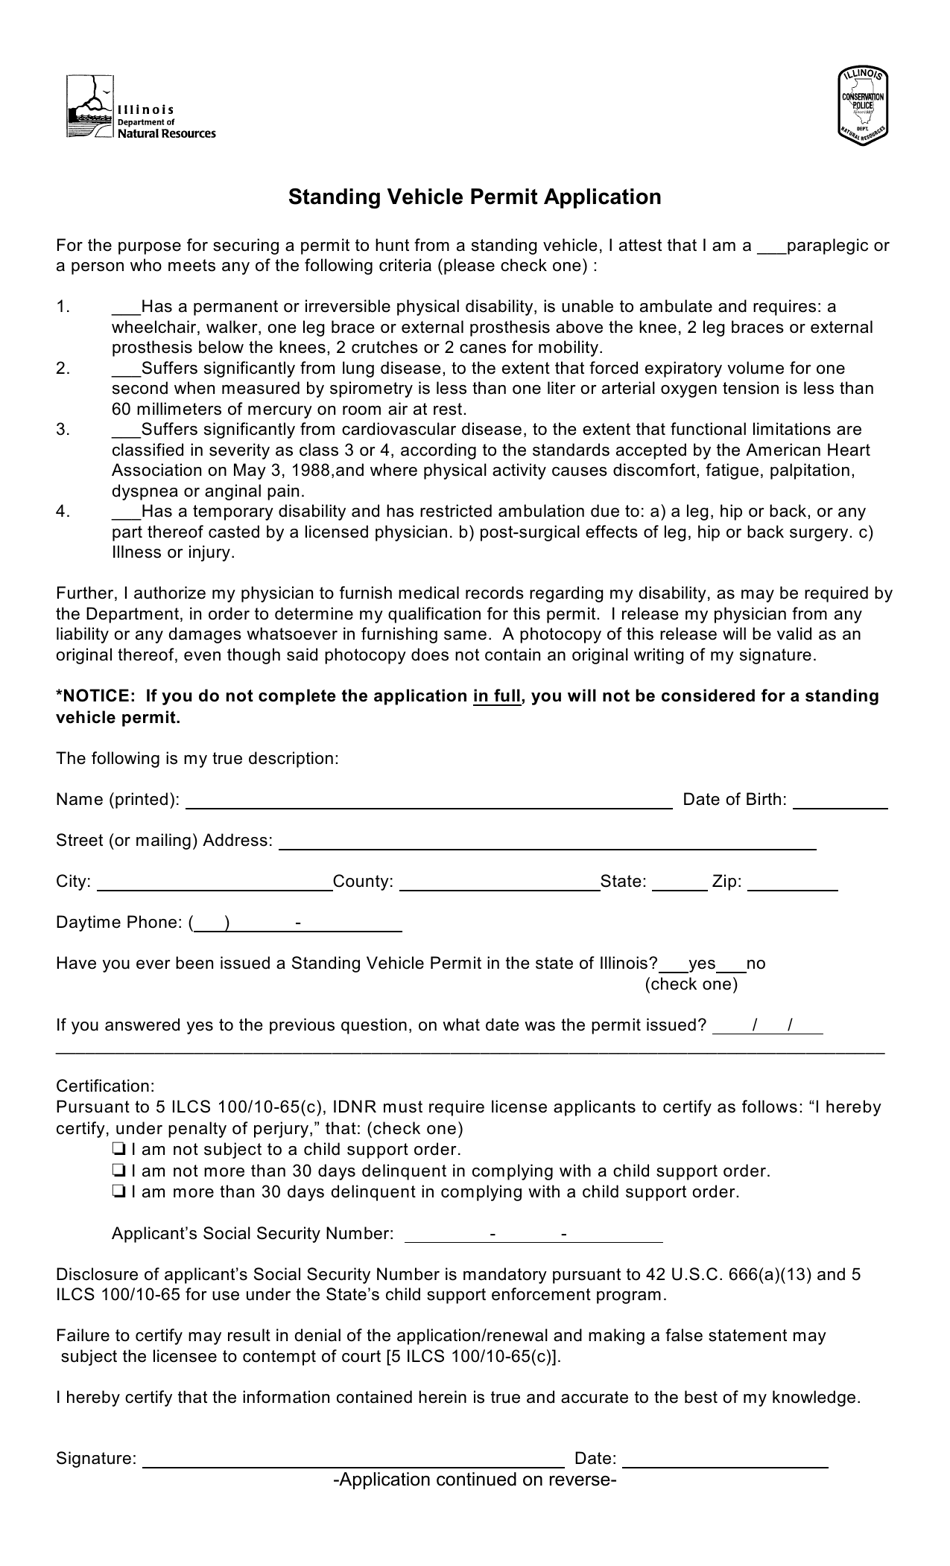 Standing Vehicle Permit Application - Illinois, Page 1